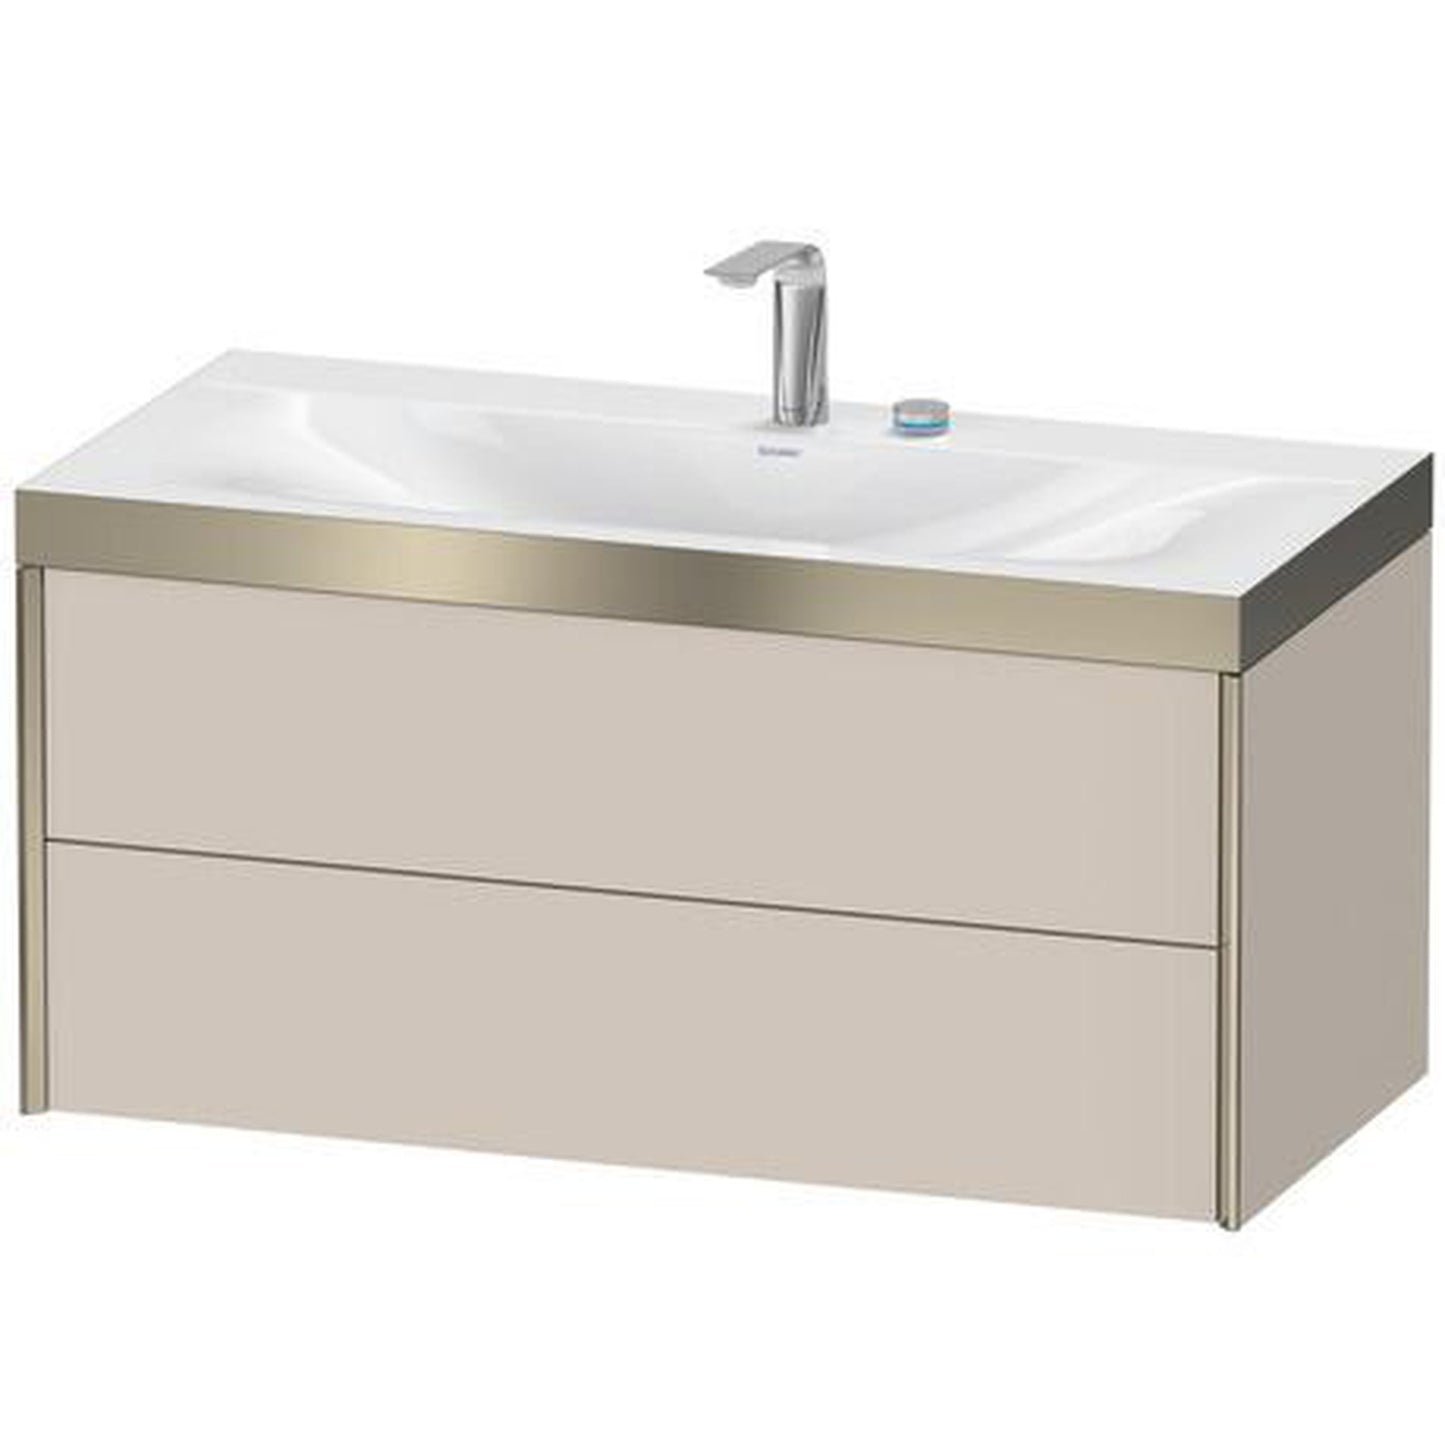 Duravit Xviu 39" x 20" x 19" Two Drawer C-Bonded Wall-Mount Vanity Kit With Two Tap Holes, Taupe (XV4616EB191P)